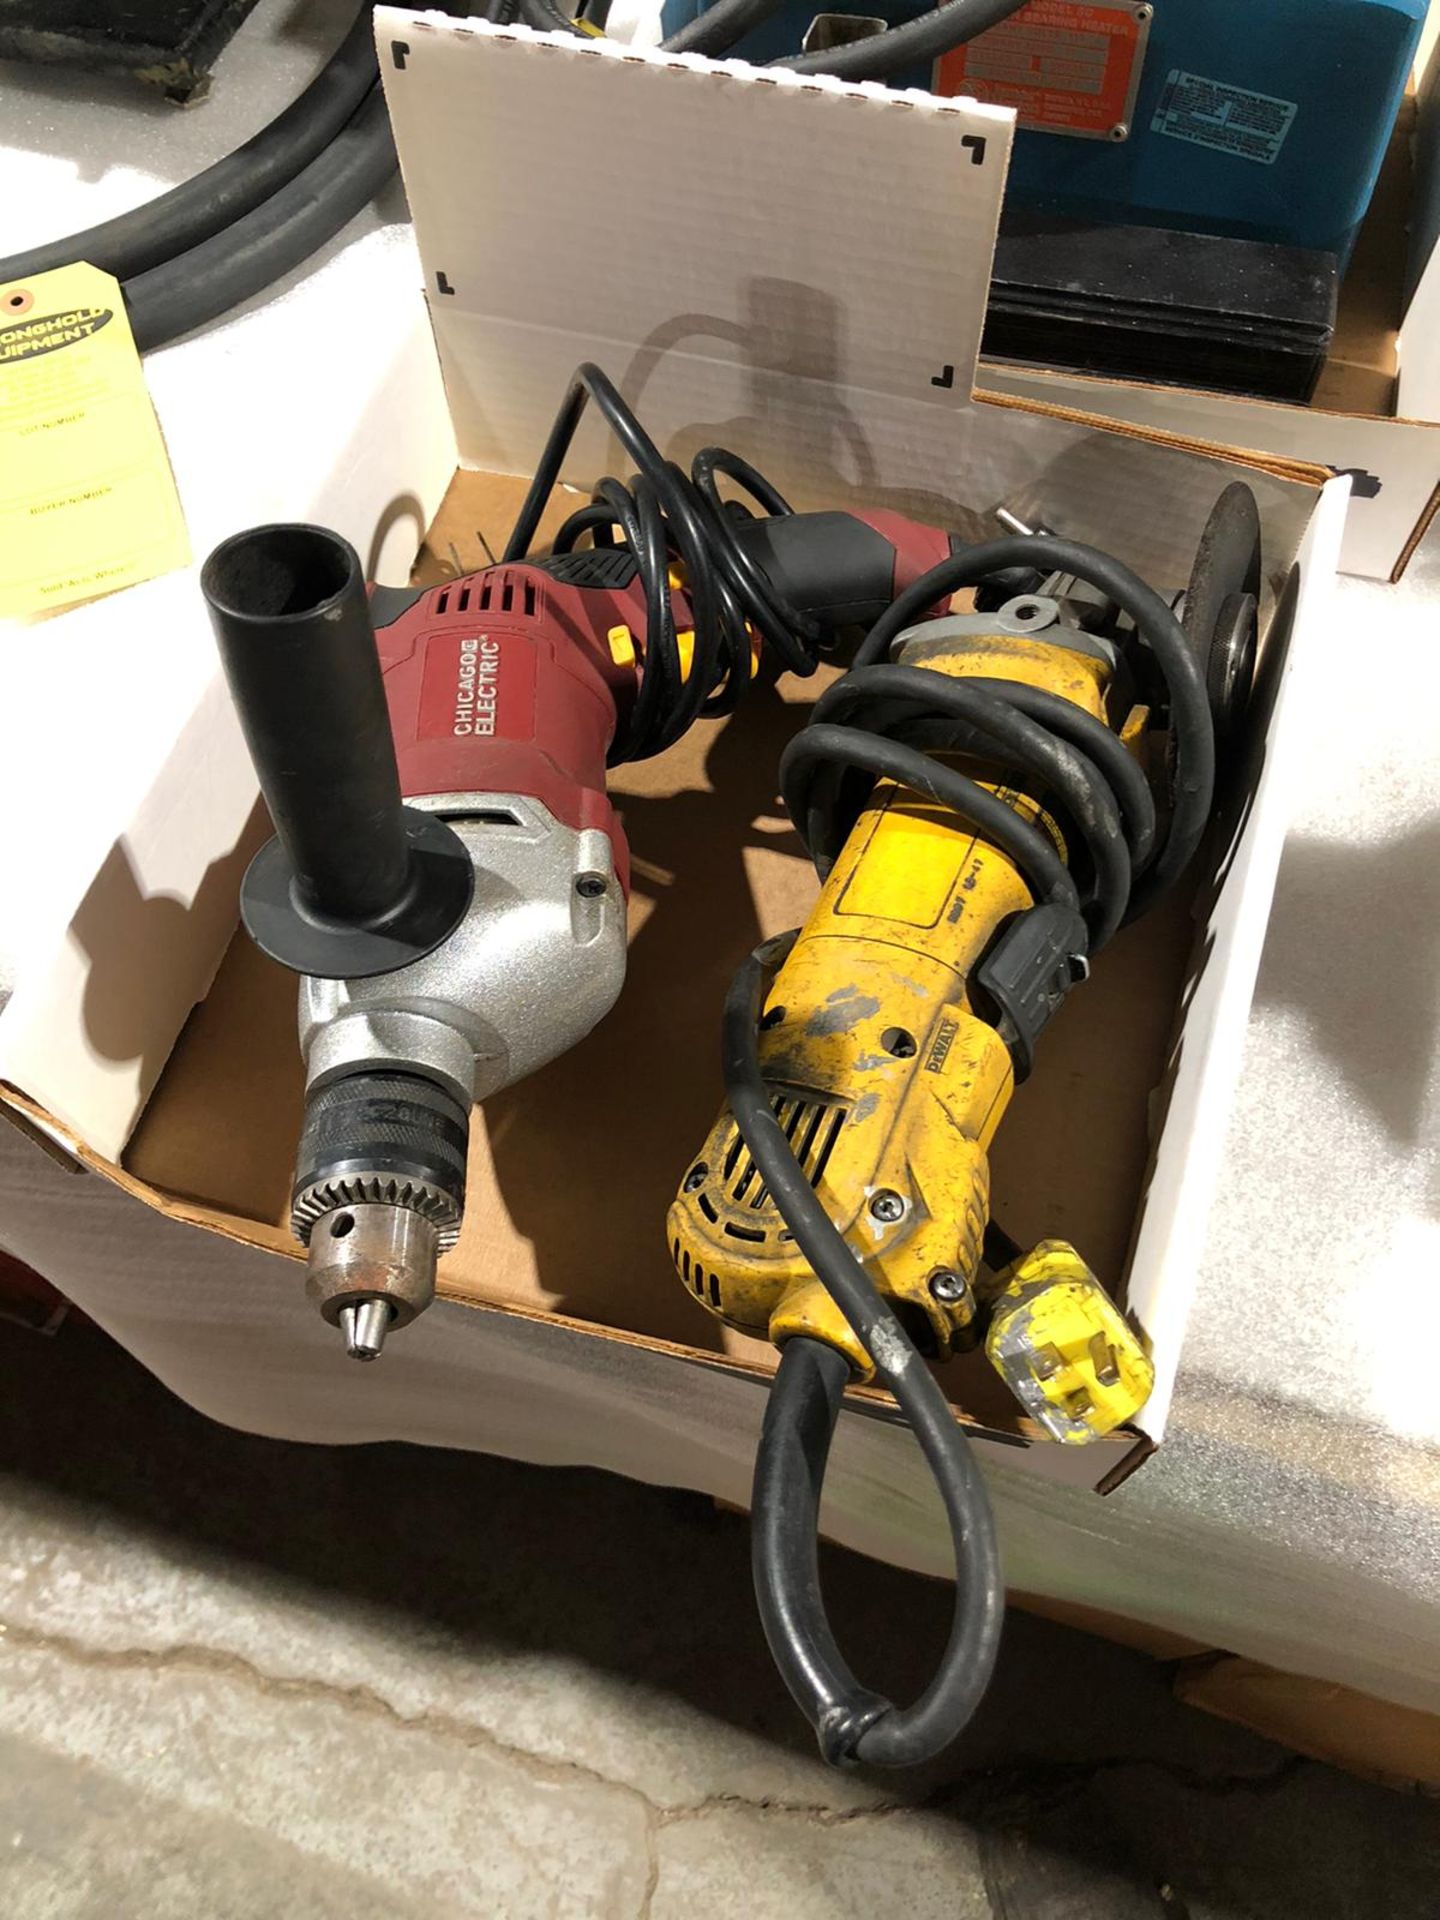 Lot of 2 (2 units) Heavy Duty Drill and Grinder Units *** FROM 5-STAR RIGGING